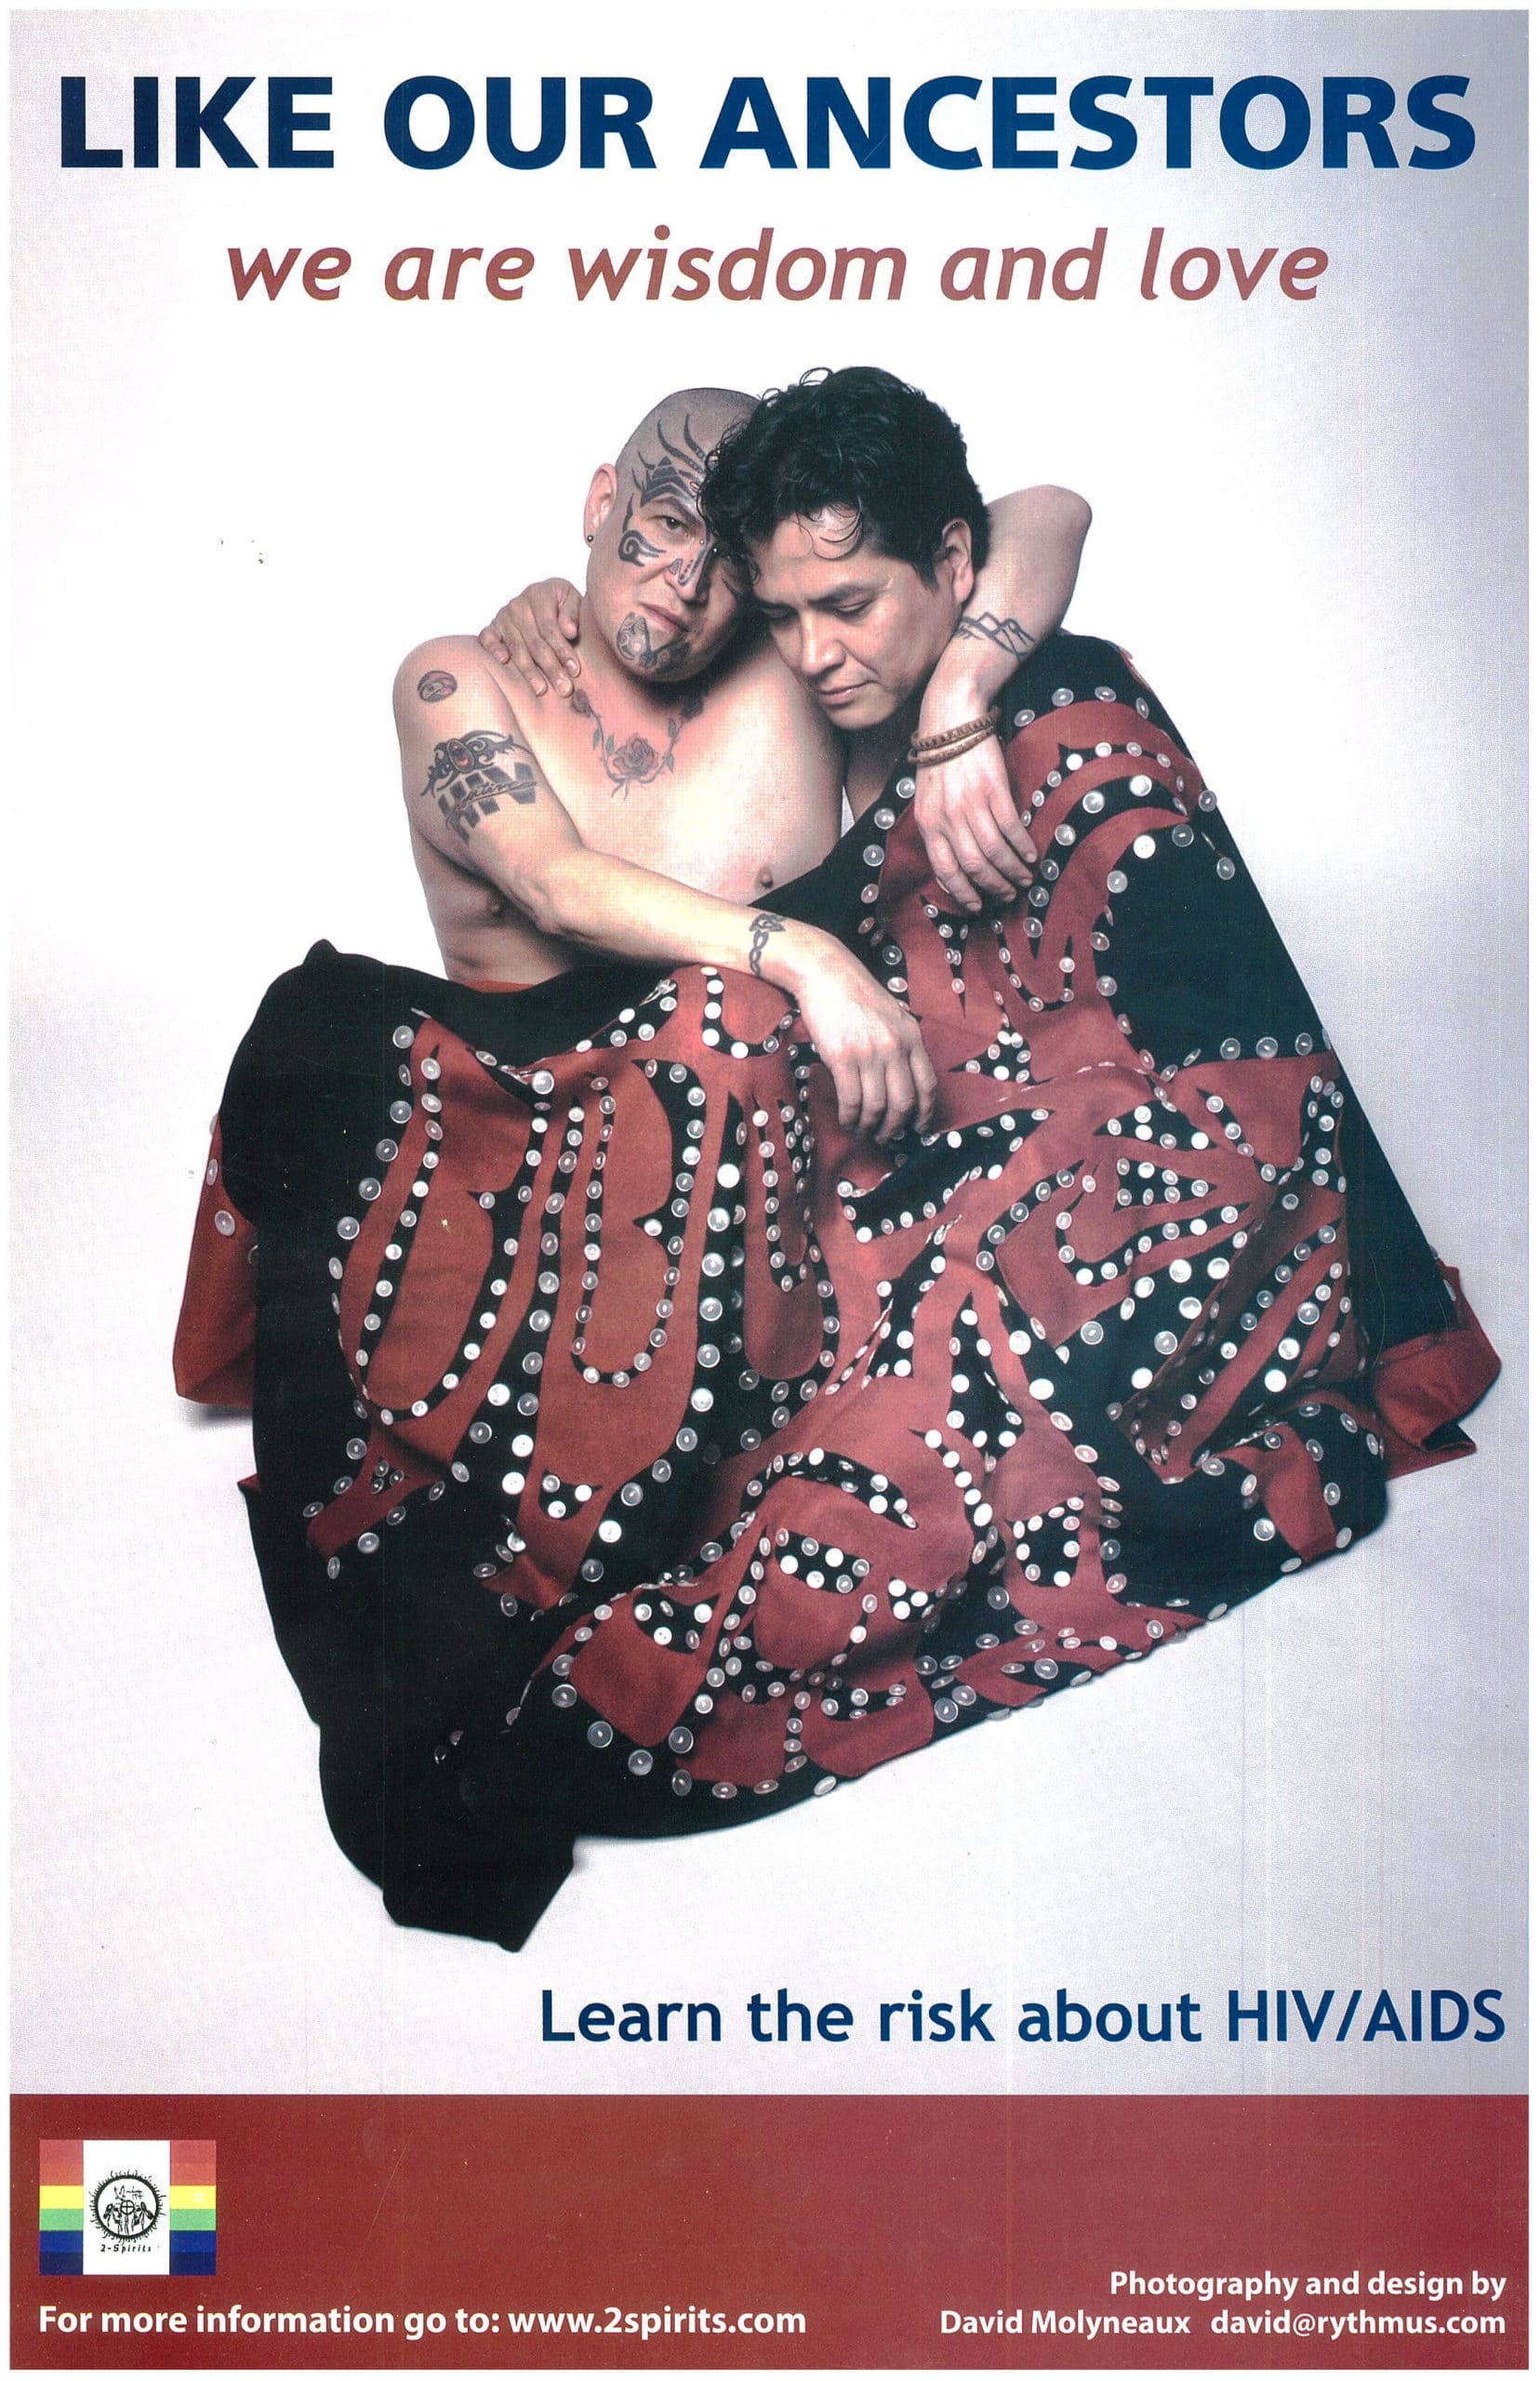 A person with a shaved head and tattoos and a person with wavy dark hair are embracing one another. Their bodies are partially covered with a black and red button blanket. Text at the top reads, “like our ancestors we are wisdom and love.” Text at the bottom reads, “learn the risk about HIV/AIDS.” In the bottom left corner, there is an image of a Pride flag with a Two-Spirit symbol in the centre.